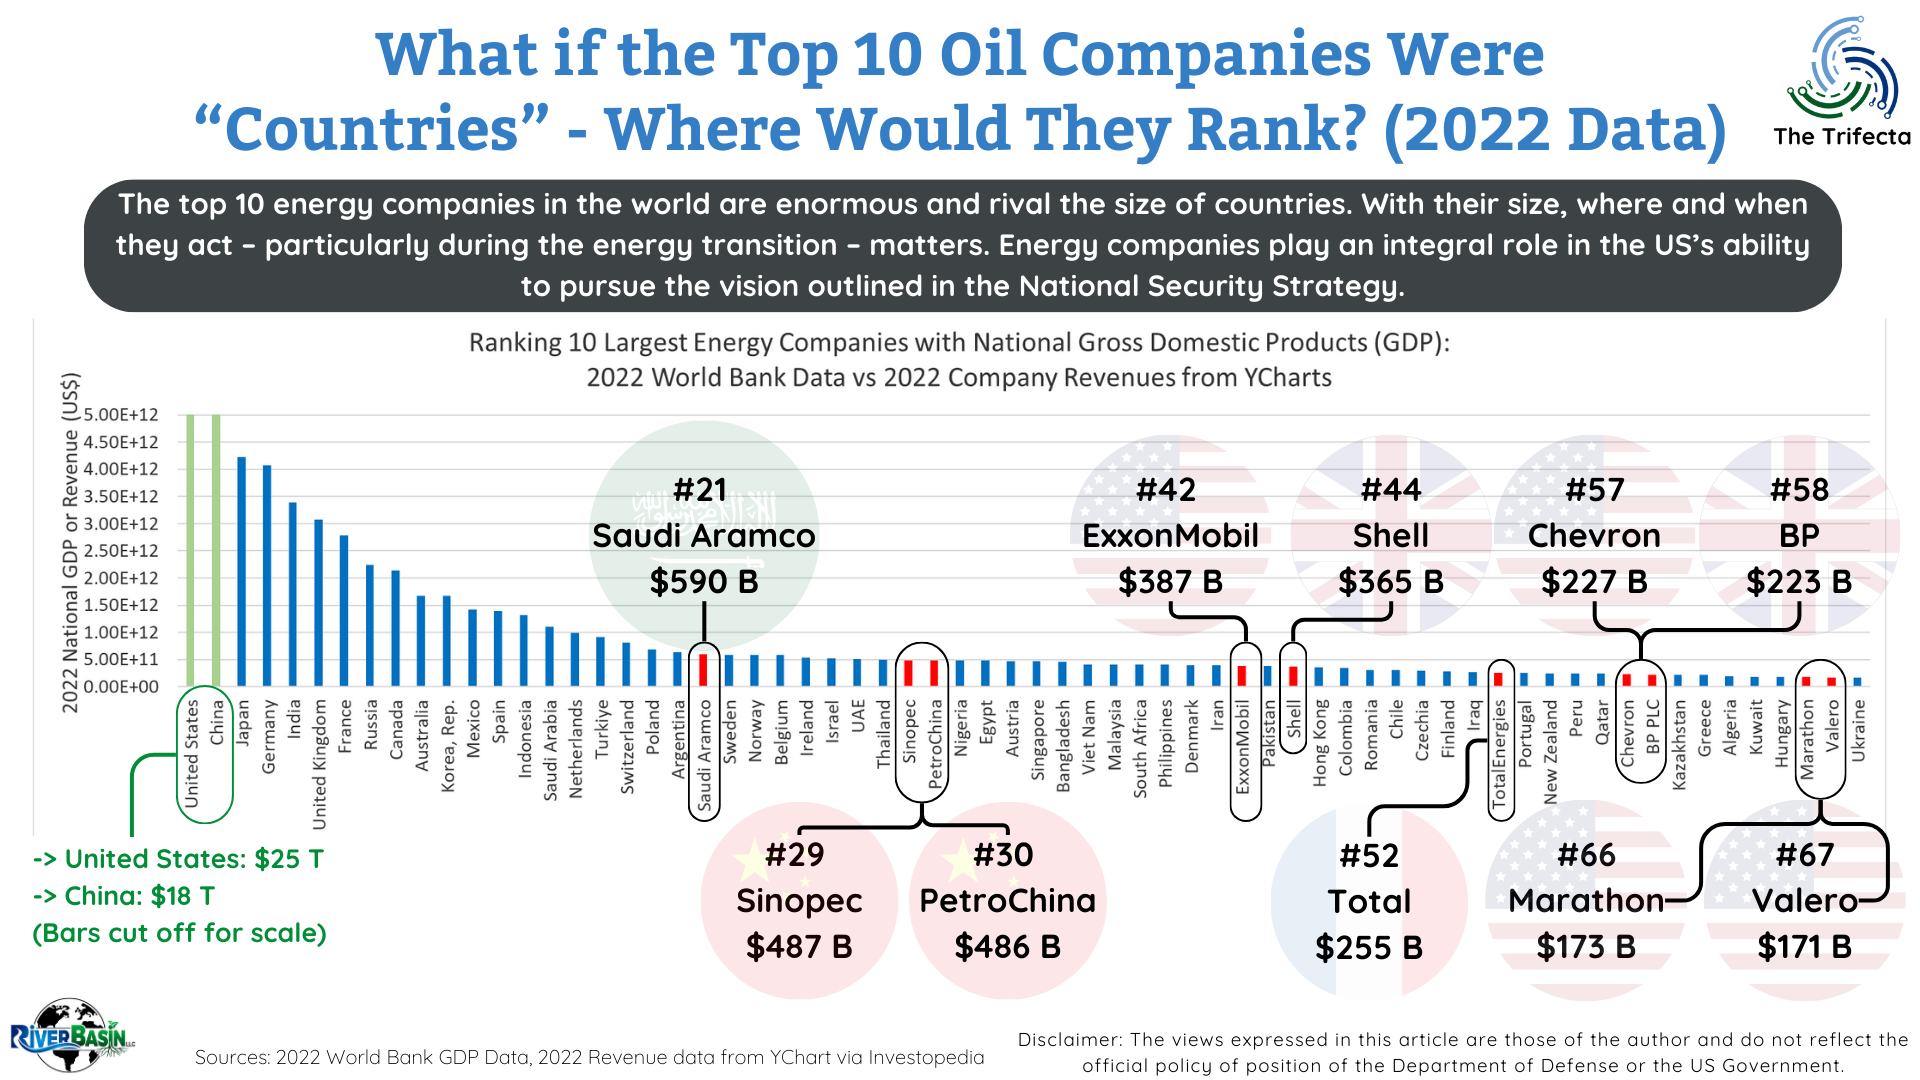 If the Top 10 Energy Companies were “countries”…